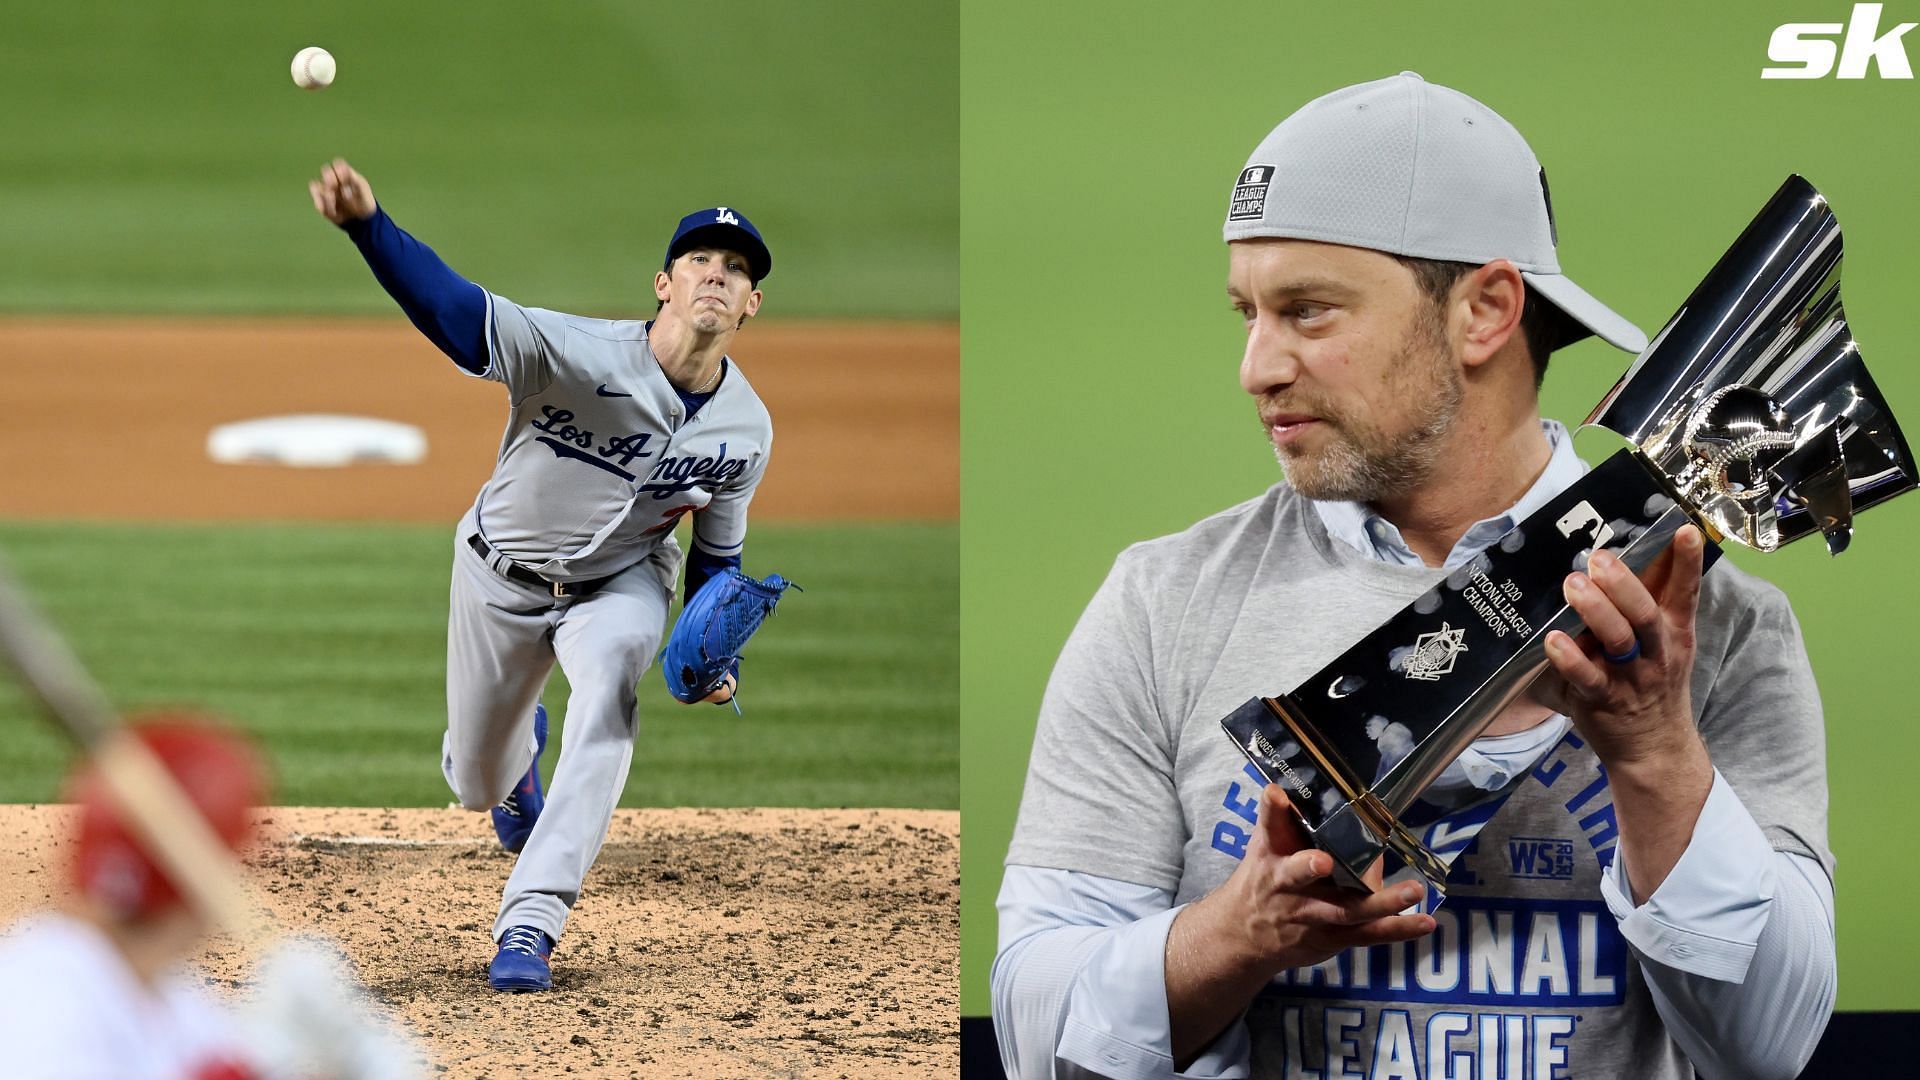 &ldquo;We would absolutely bet on him&rdquo; - Dodgers President Andrew Friedman remains optimistic about Walker Buehler despite rehab struggles